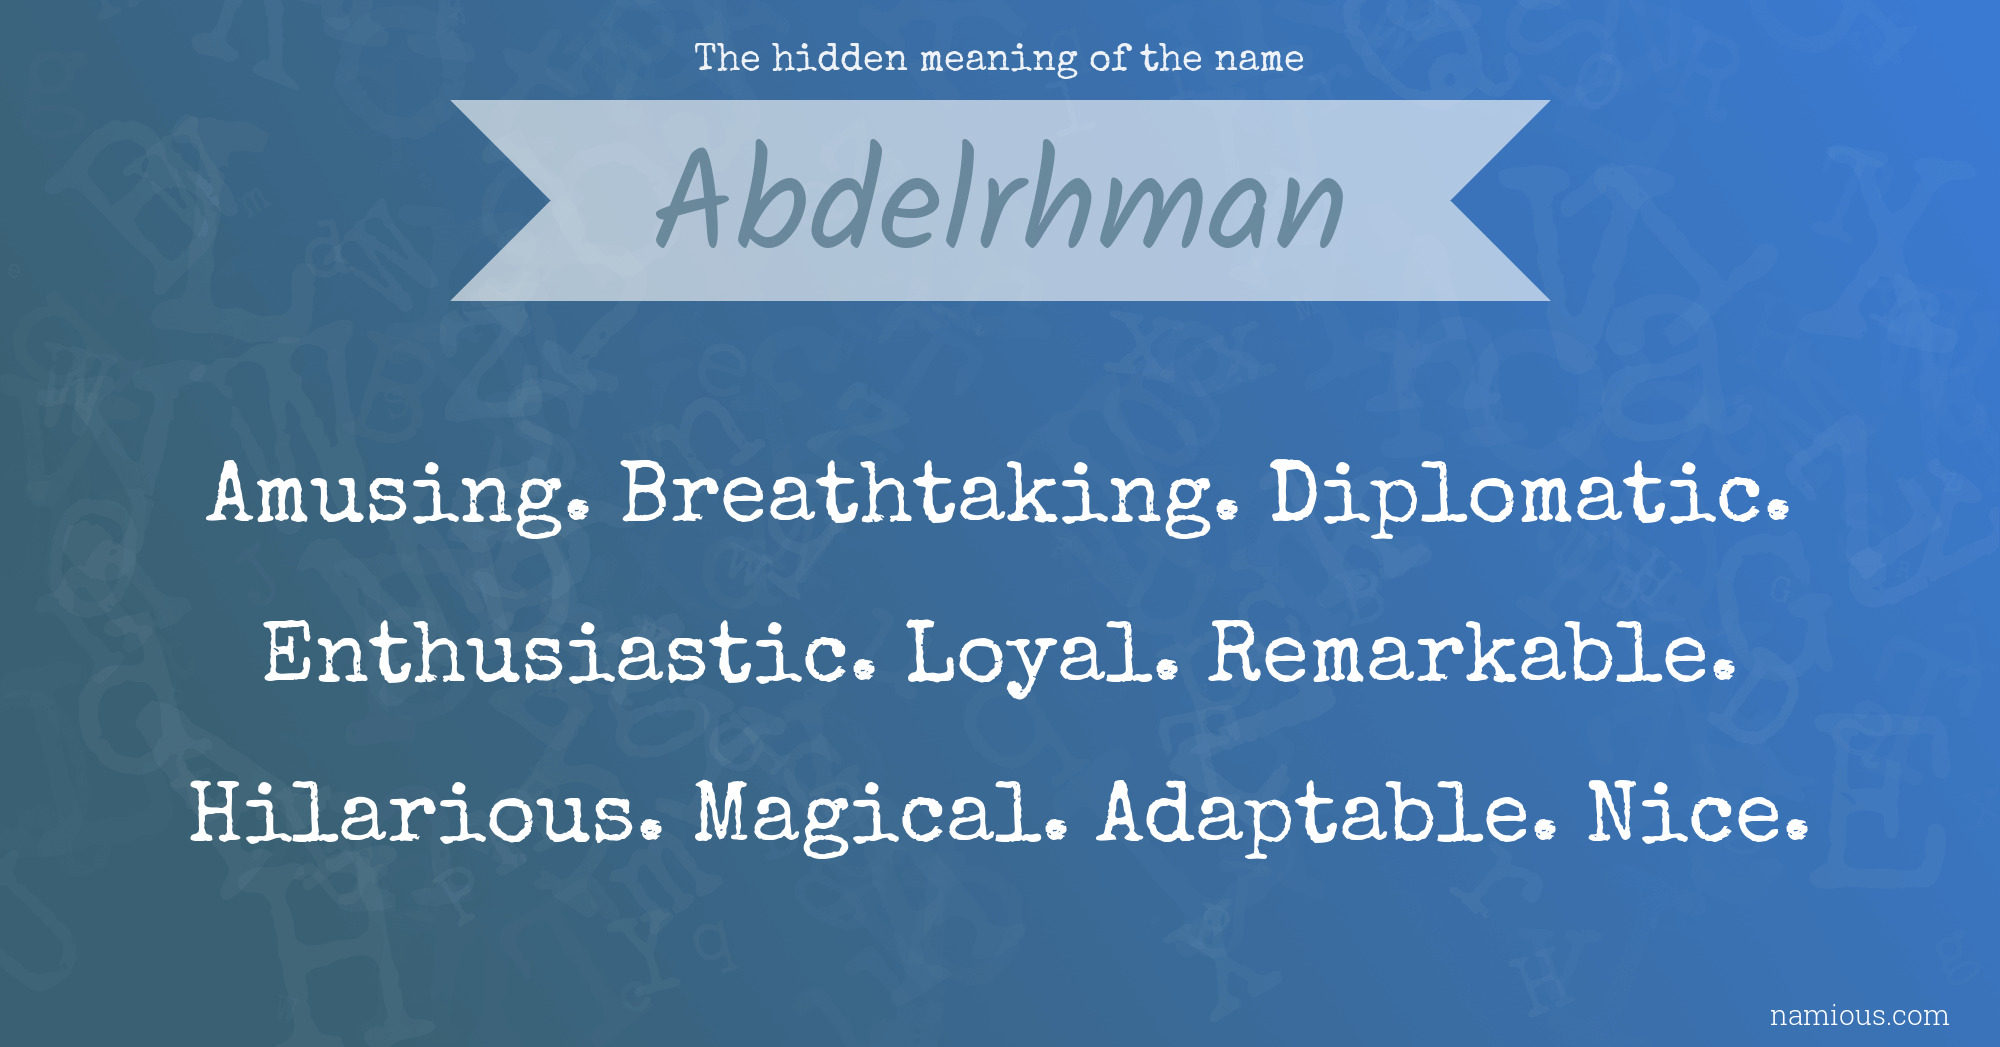 The hidden meaning of the name Abdelrhman